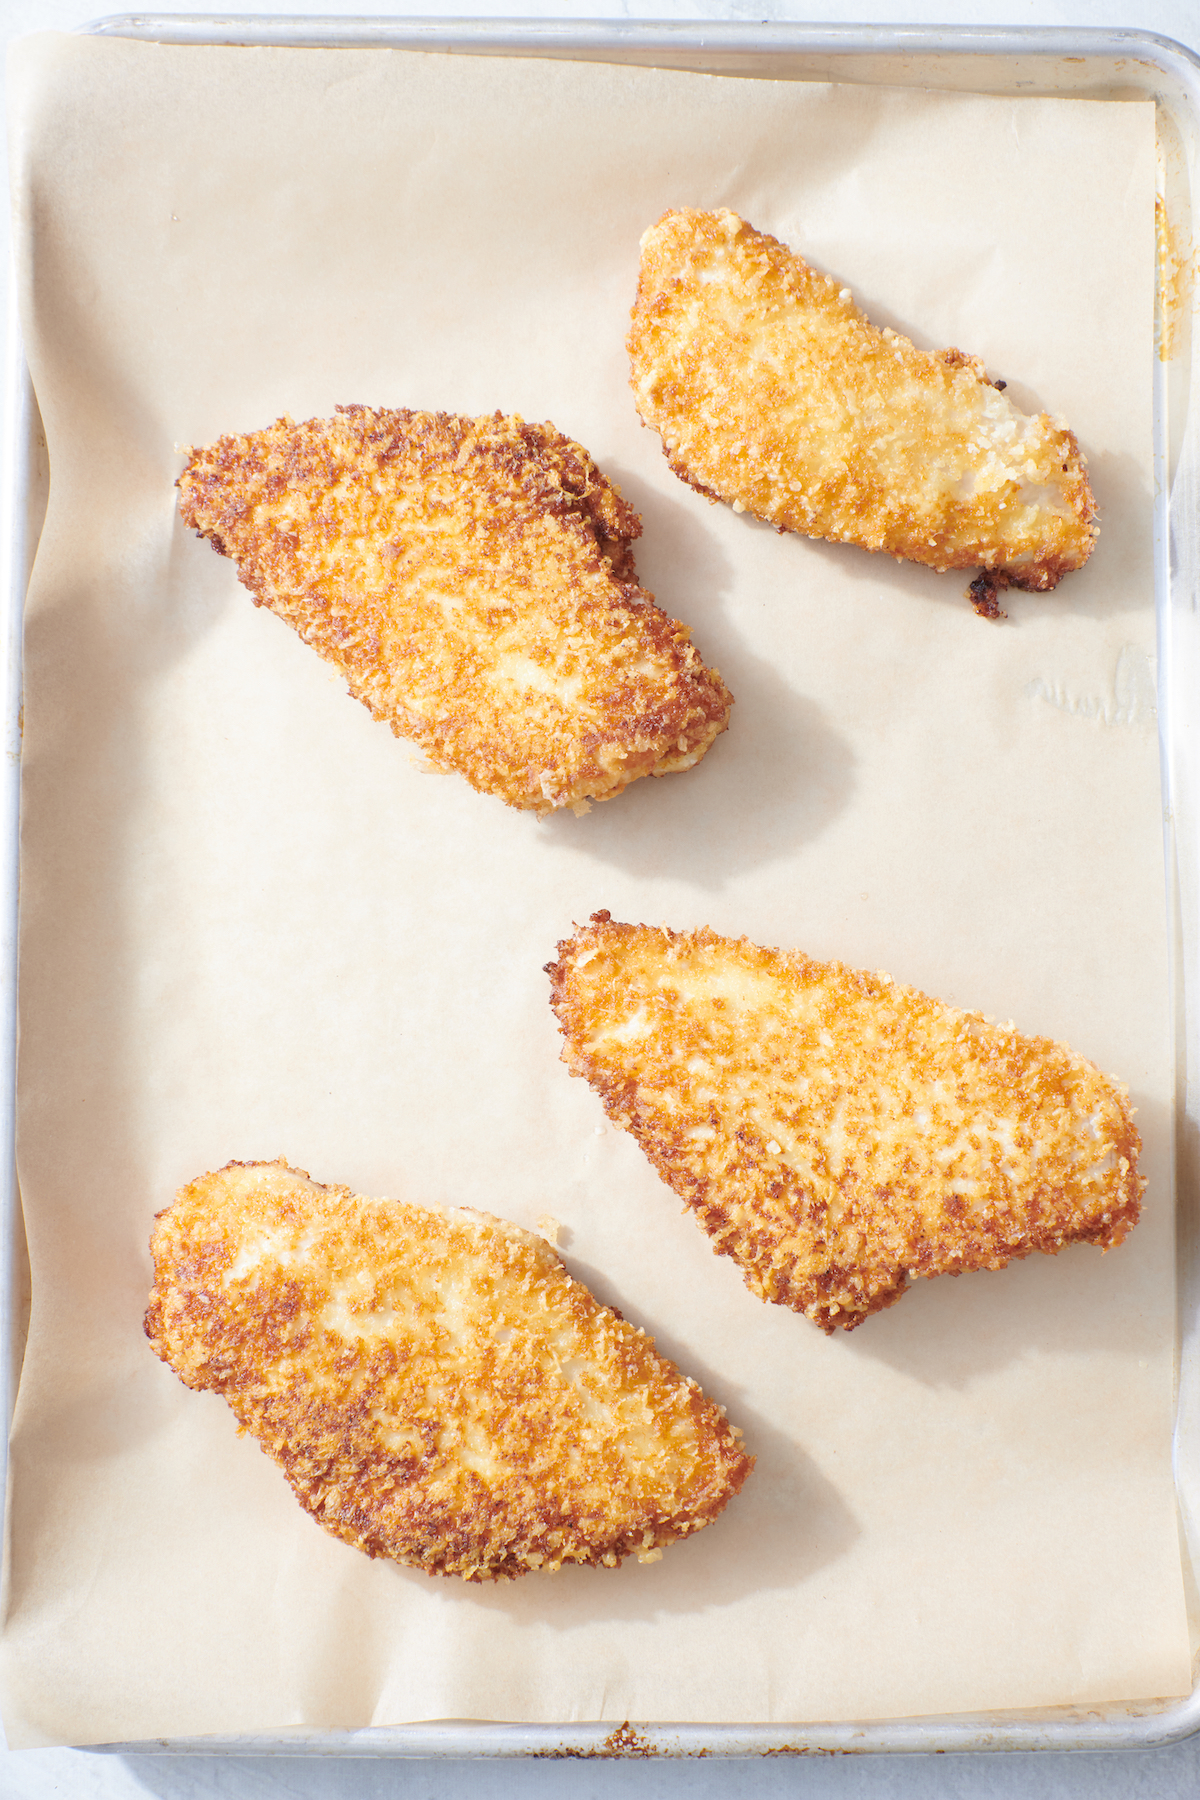 Breaded chicken on parchment paper lined baking sheet.